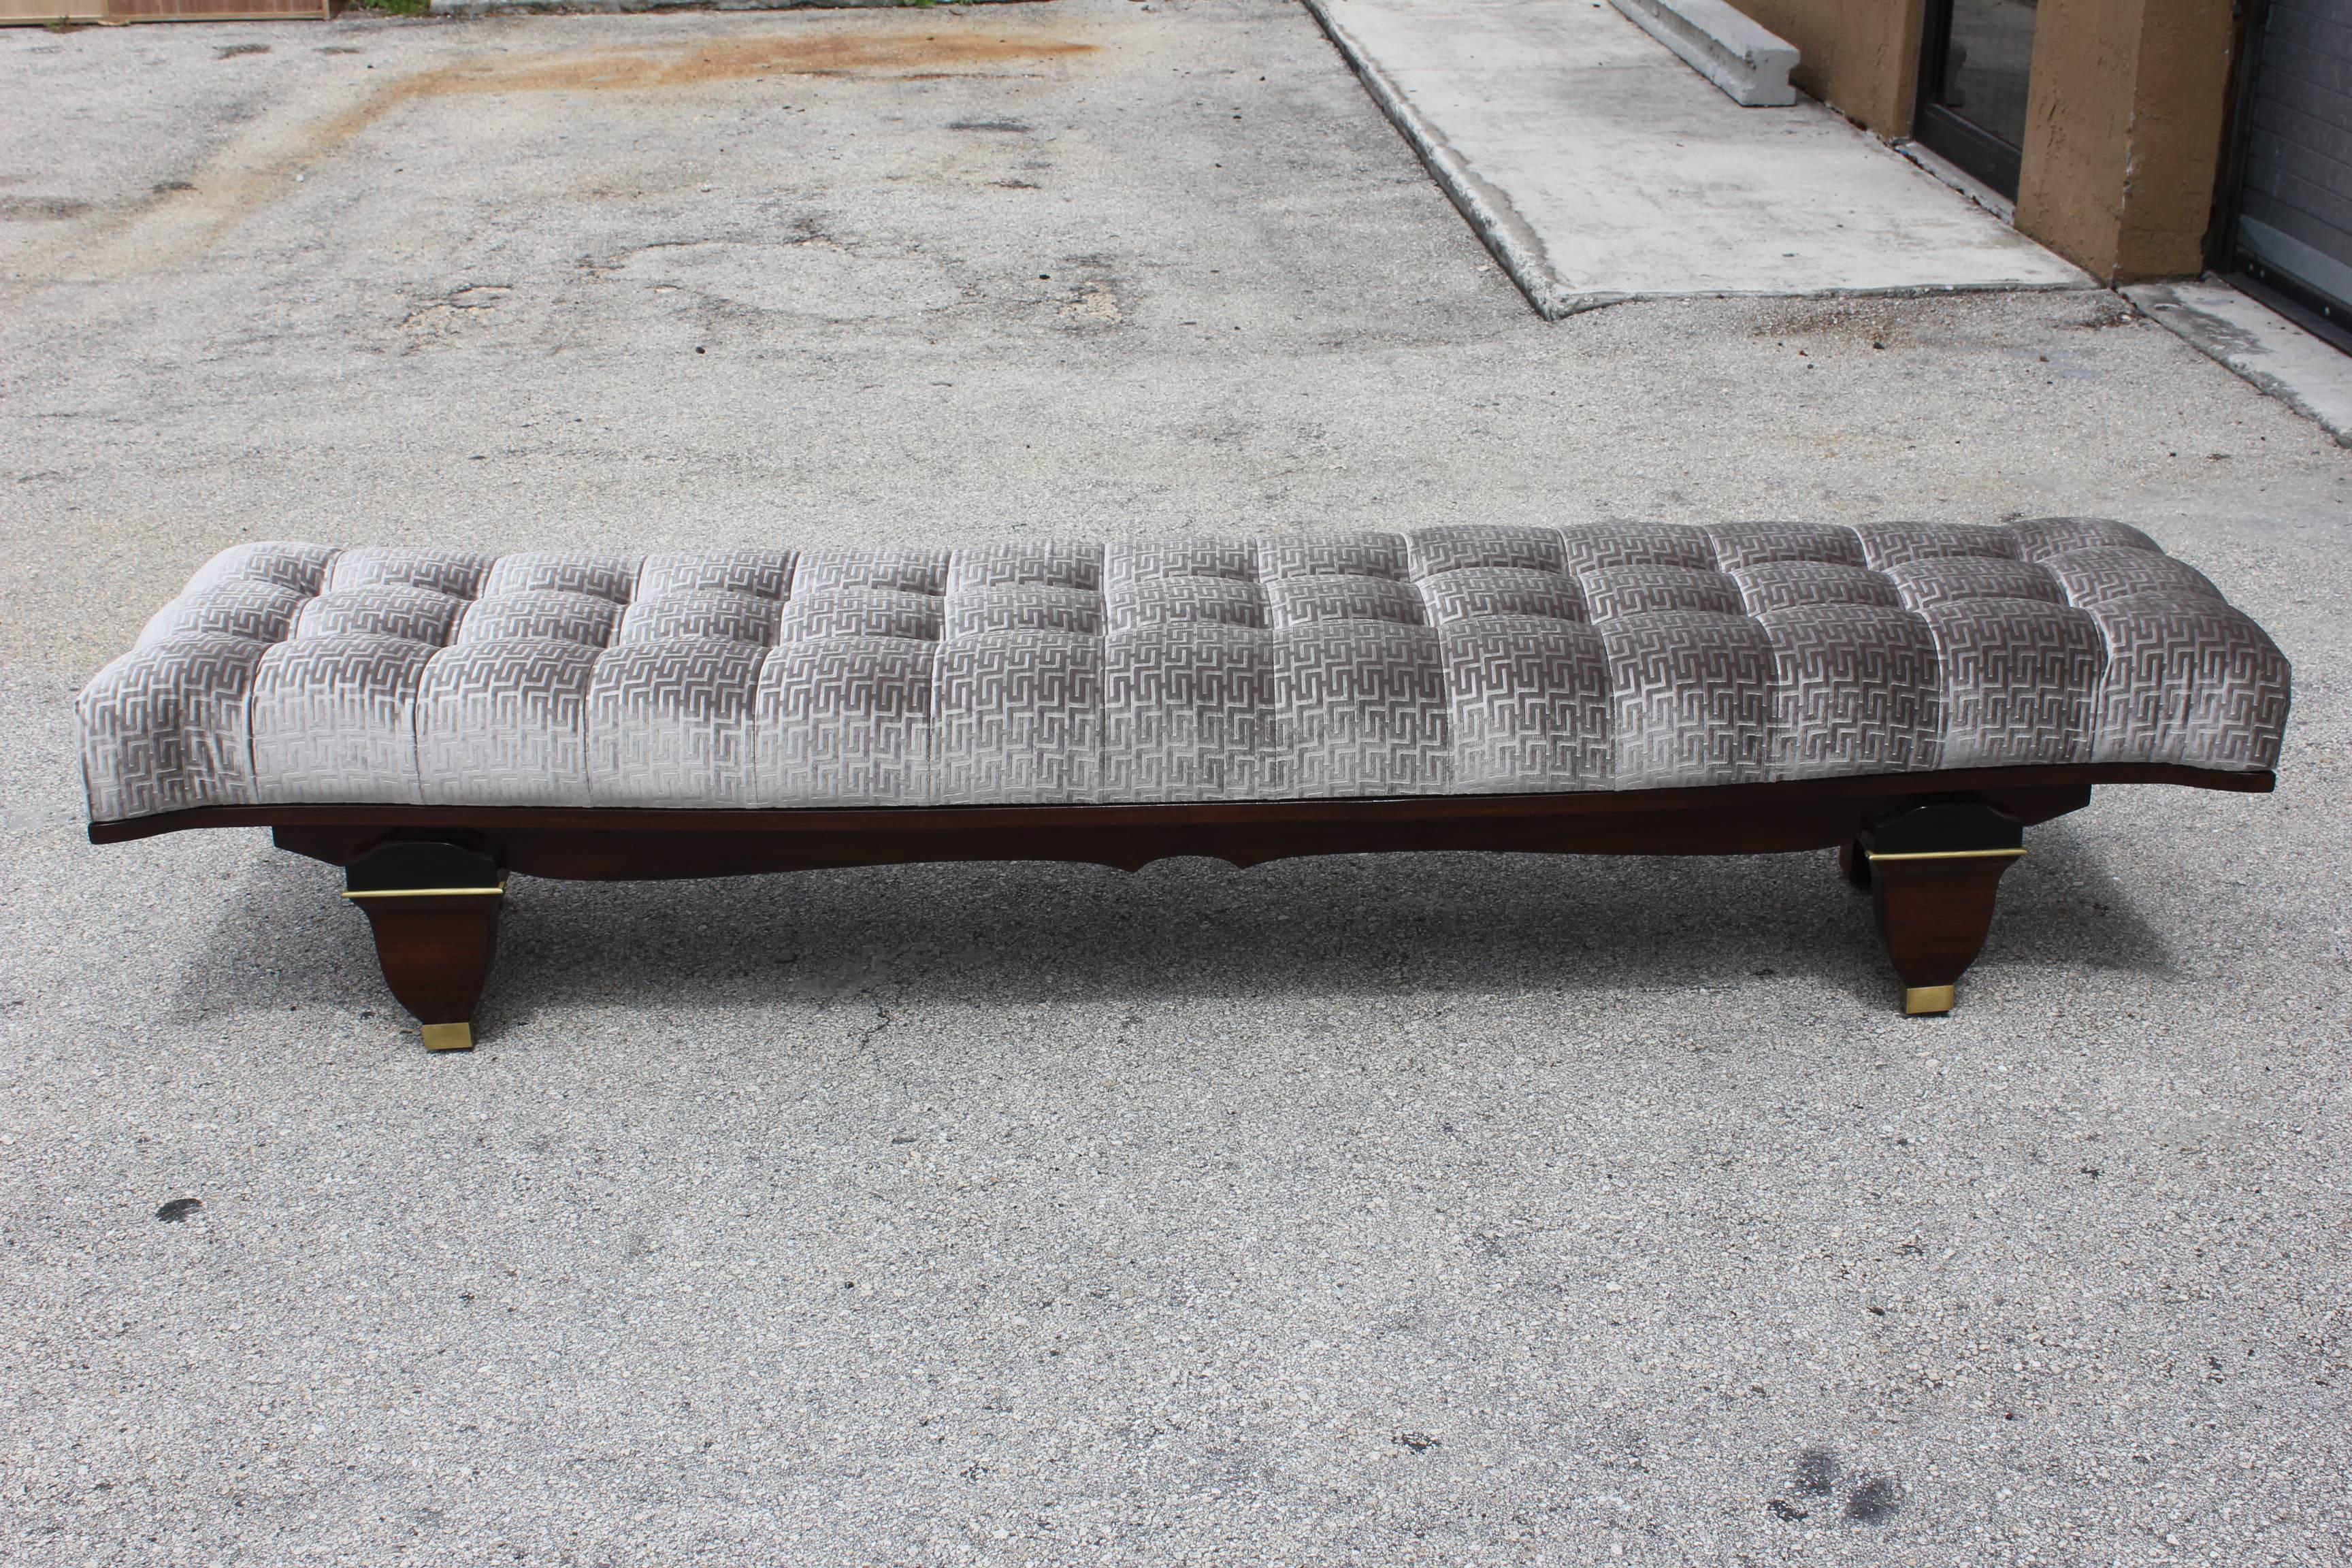 A stunning French Art Deco exotic Macassar ebony sitting bench, circa 1940s. Beautifully detailed, curved end detail. Newly upholstered in a very high end textile. French estate item.